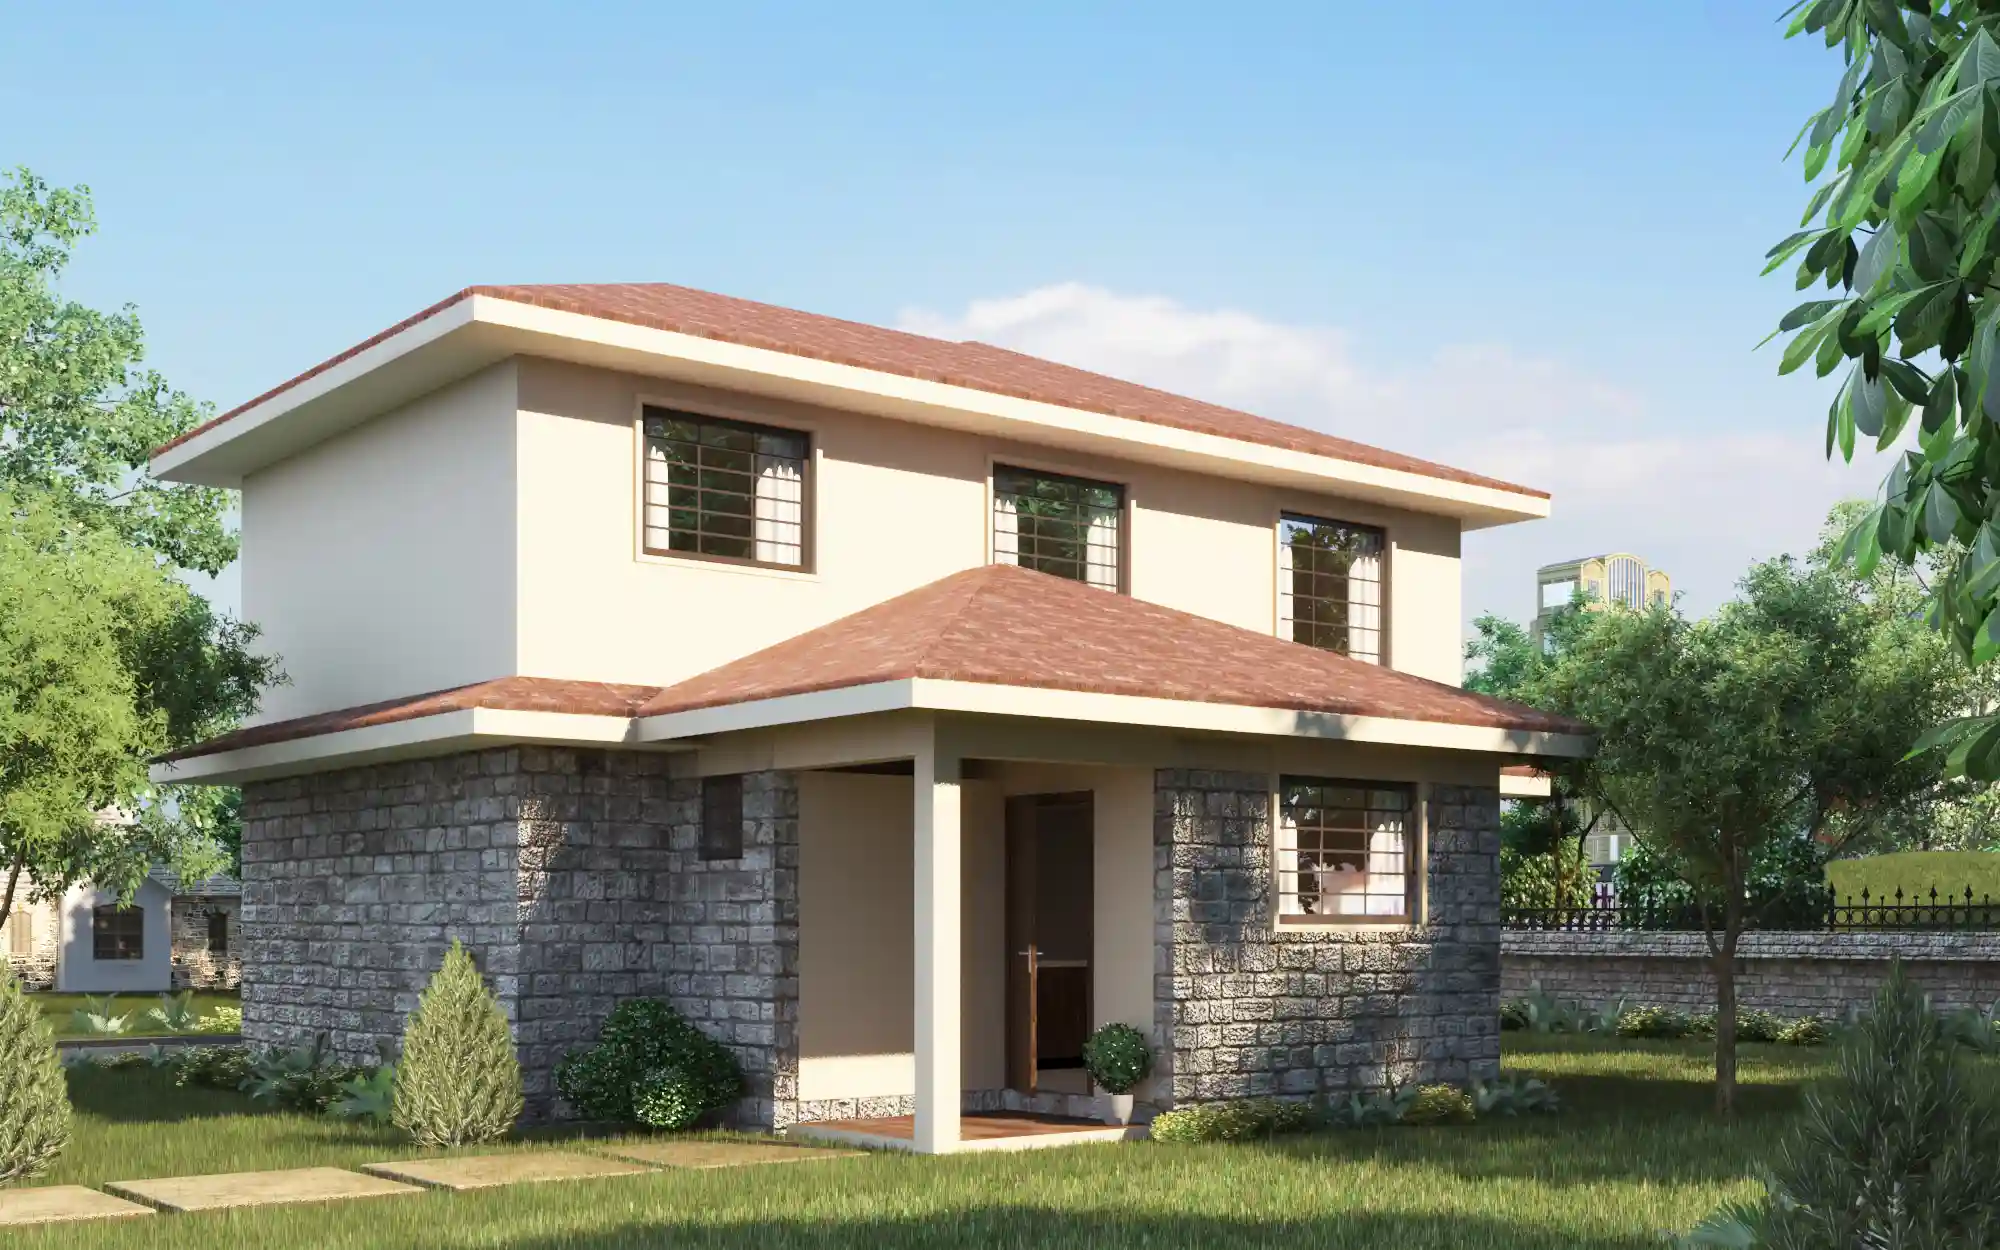 4 Bedroom Maisonette - ID 4211 - INUUA 4 BED MAST TP1 OP1-4211_REAR_VIEW.jpg from Inuua Tujenge house plans with 4 bedrooms and 3 bathrooms. ( maisonette )